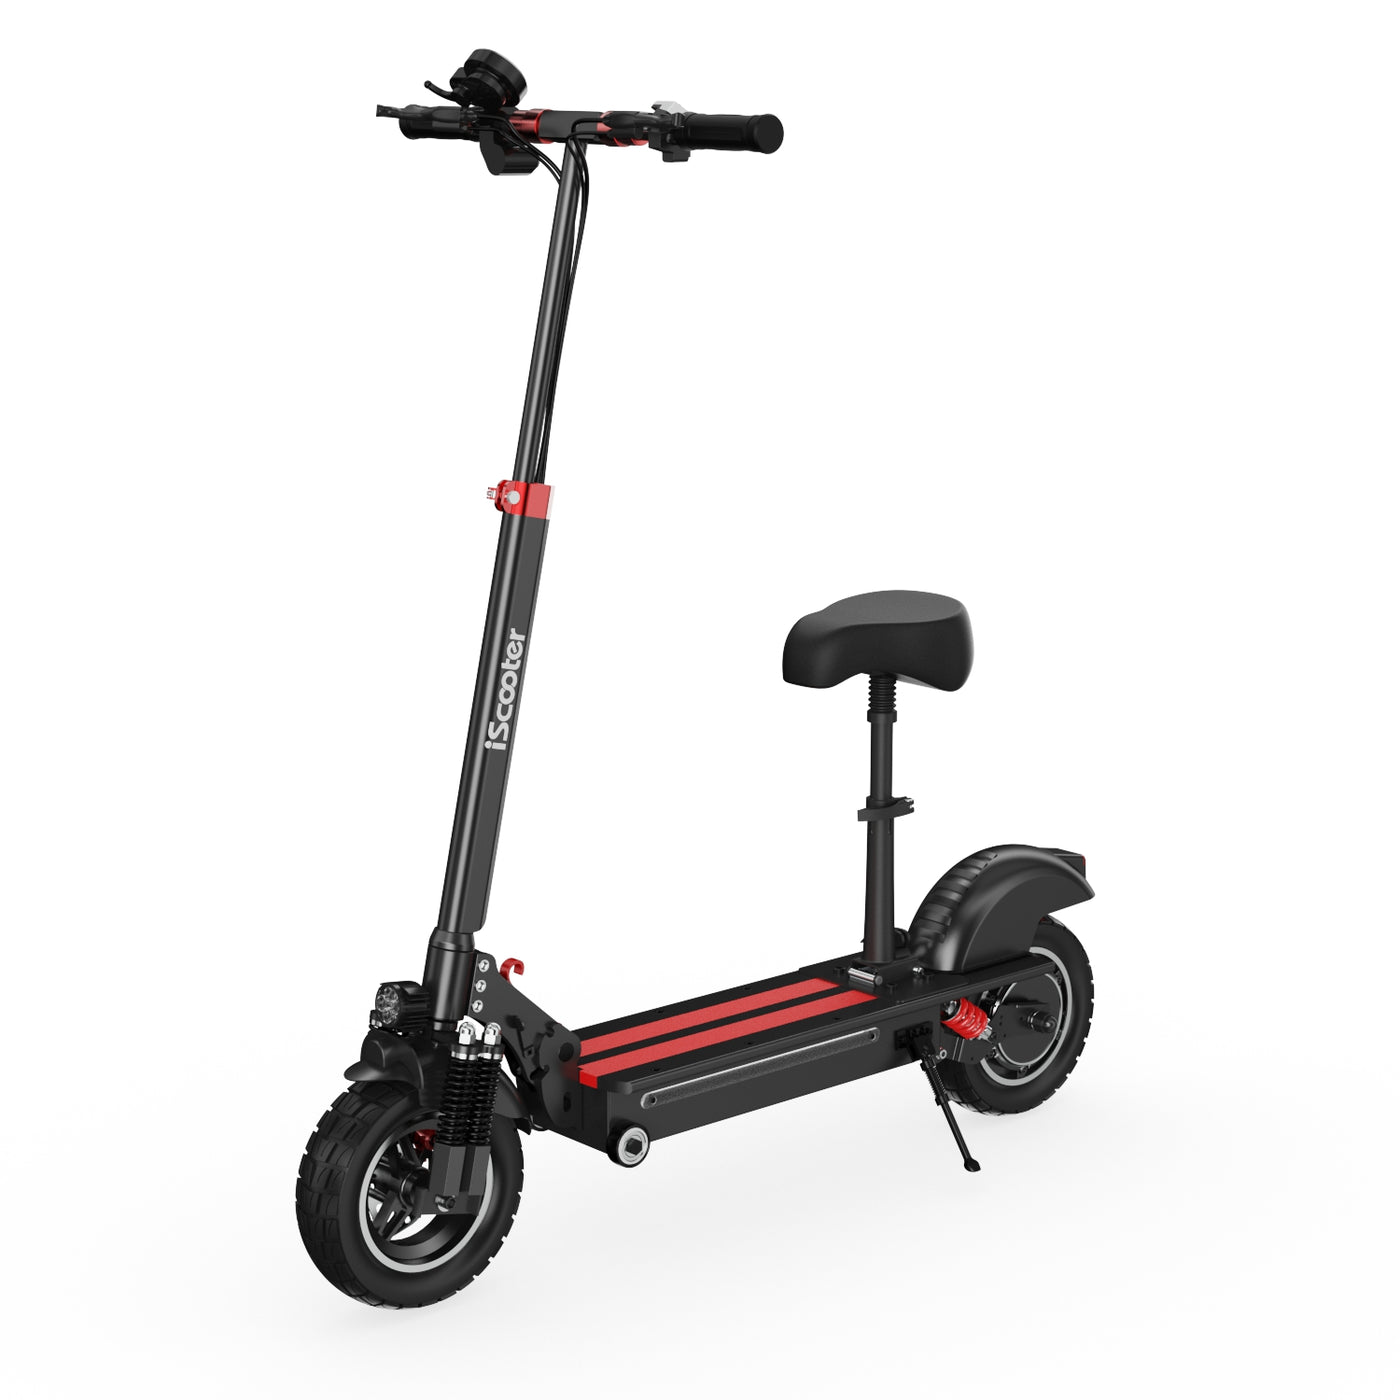 25 mph electric scooter